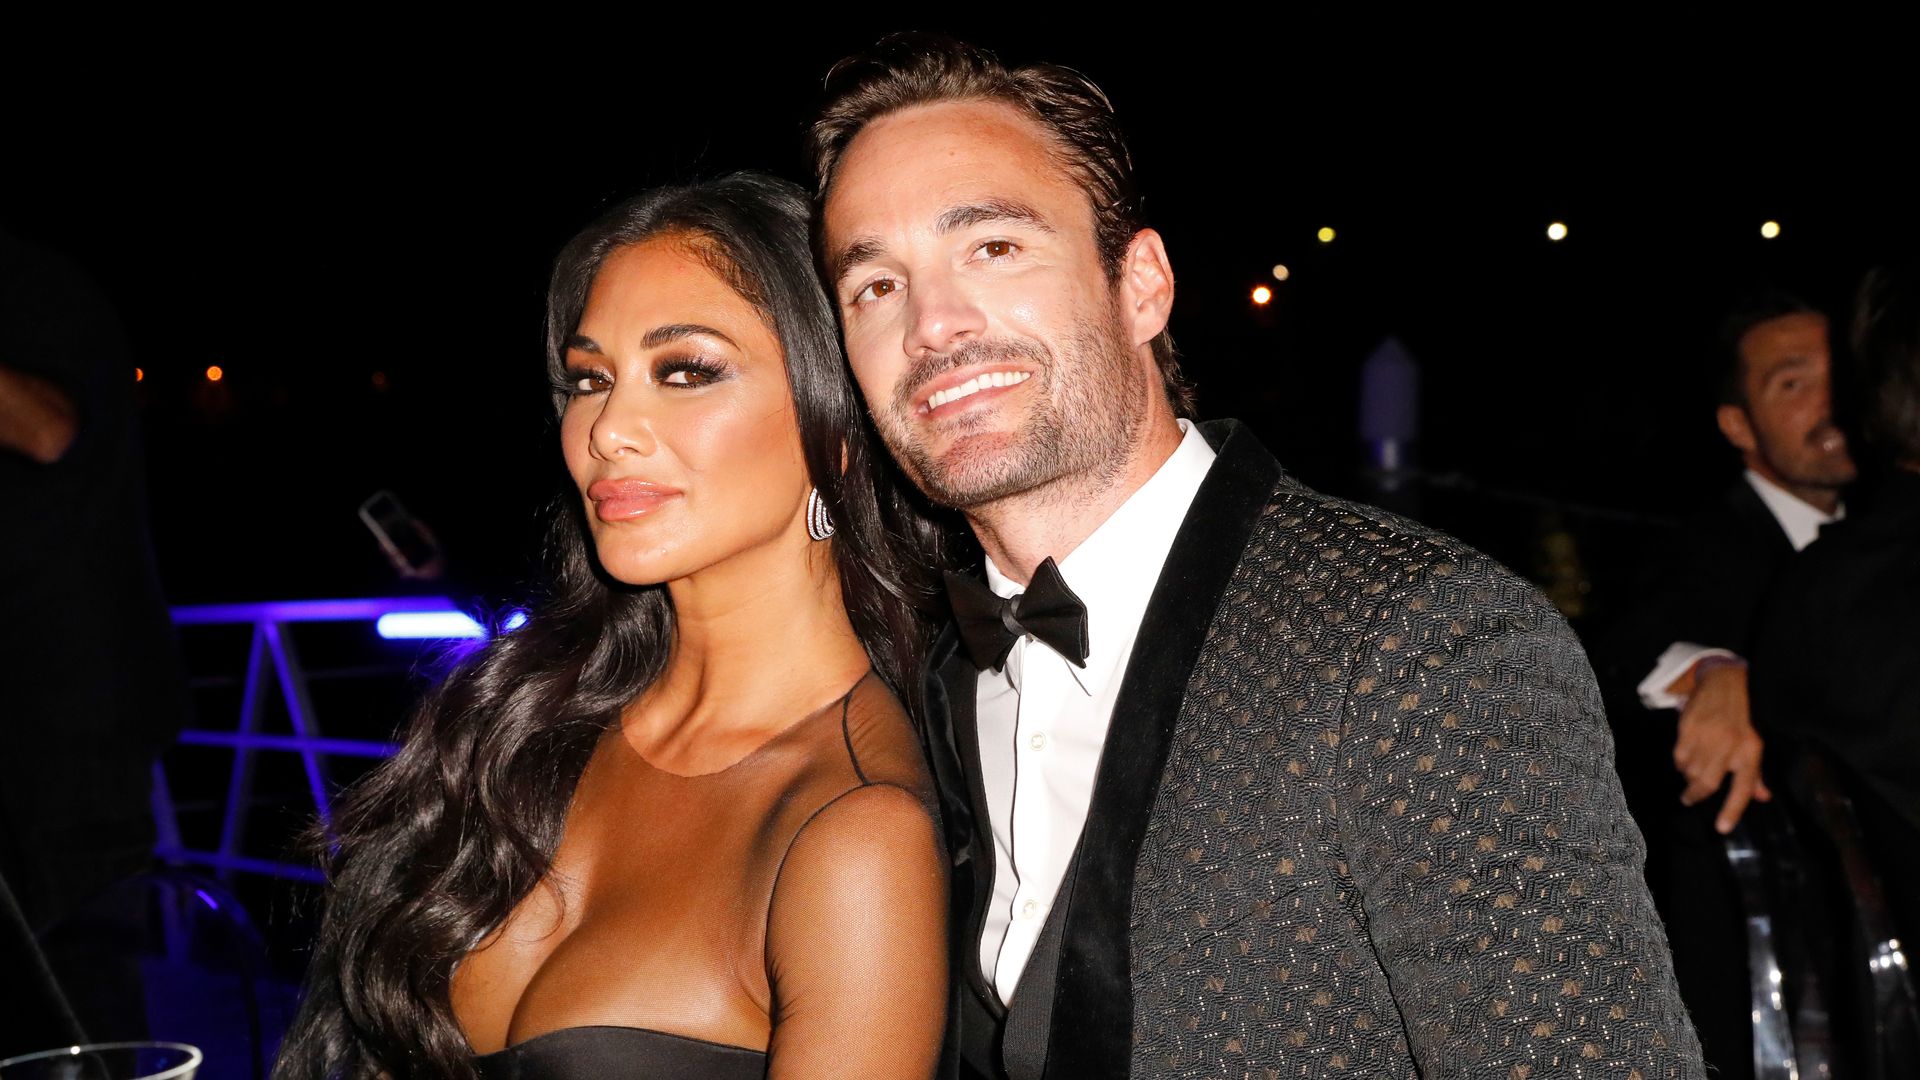 Nicole Scherzinger and Thom Evans attend the amfAR Venice gala 2021 on September 10, 2021 in Venice, Italy